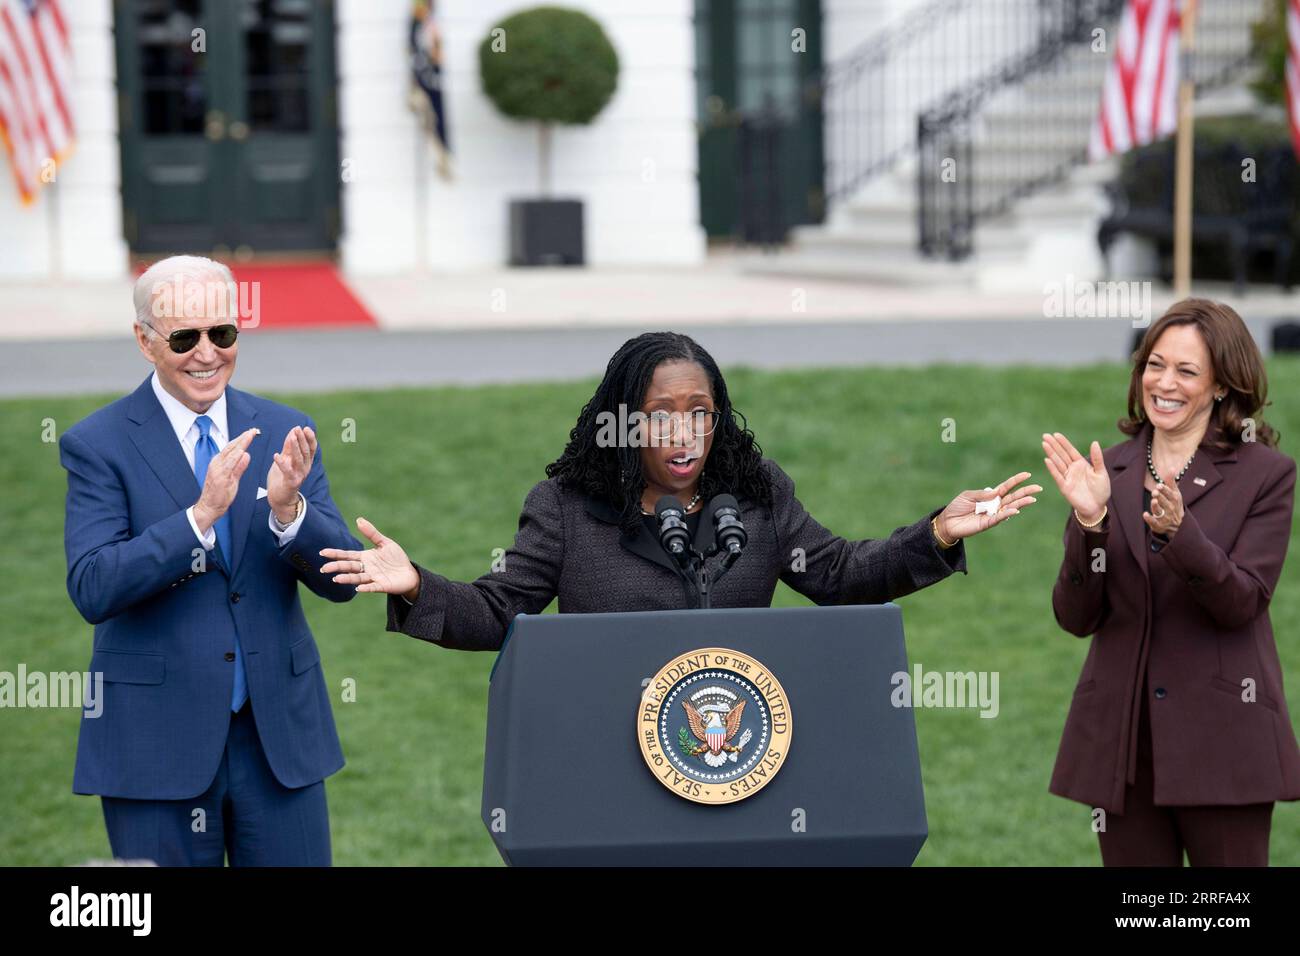 220408 -- WASHINGTON, April 8, 2022 -- Judge Ketanji Brown Jackson C, U.S. President Joe Biden L and Vice President Kamala Harris attend an event marking the Senate confirmation of Jackson for the Supreme Court at the South Lawn of the White House in Washington, D.C., the United States, on April 8, 2022. The White House held the event Friday afternoon to mark the Senate confirmation of the first African American woman for the Supreme Court.  U.S.-WASHINGTON, D.C.-WHITE HOUSE-JUDGE KETANJI BROWN JACKSON-SUPREME COURT-CONFIRMATION LiuxJie PUBLICATIONxNOTxINxCHN Stock Photo